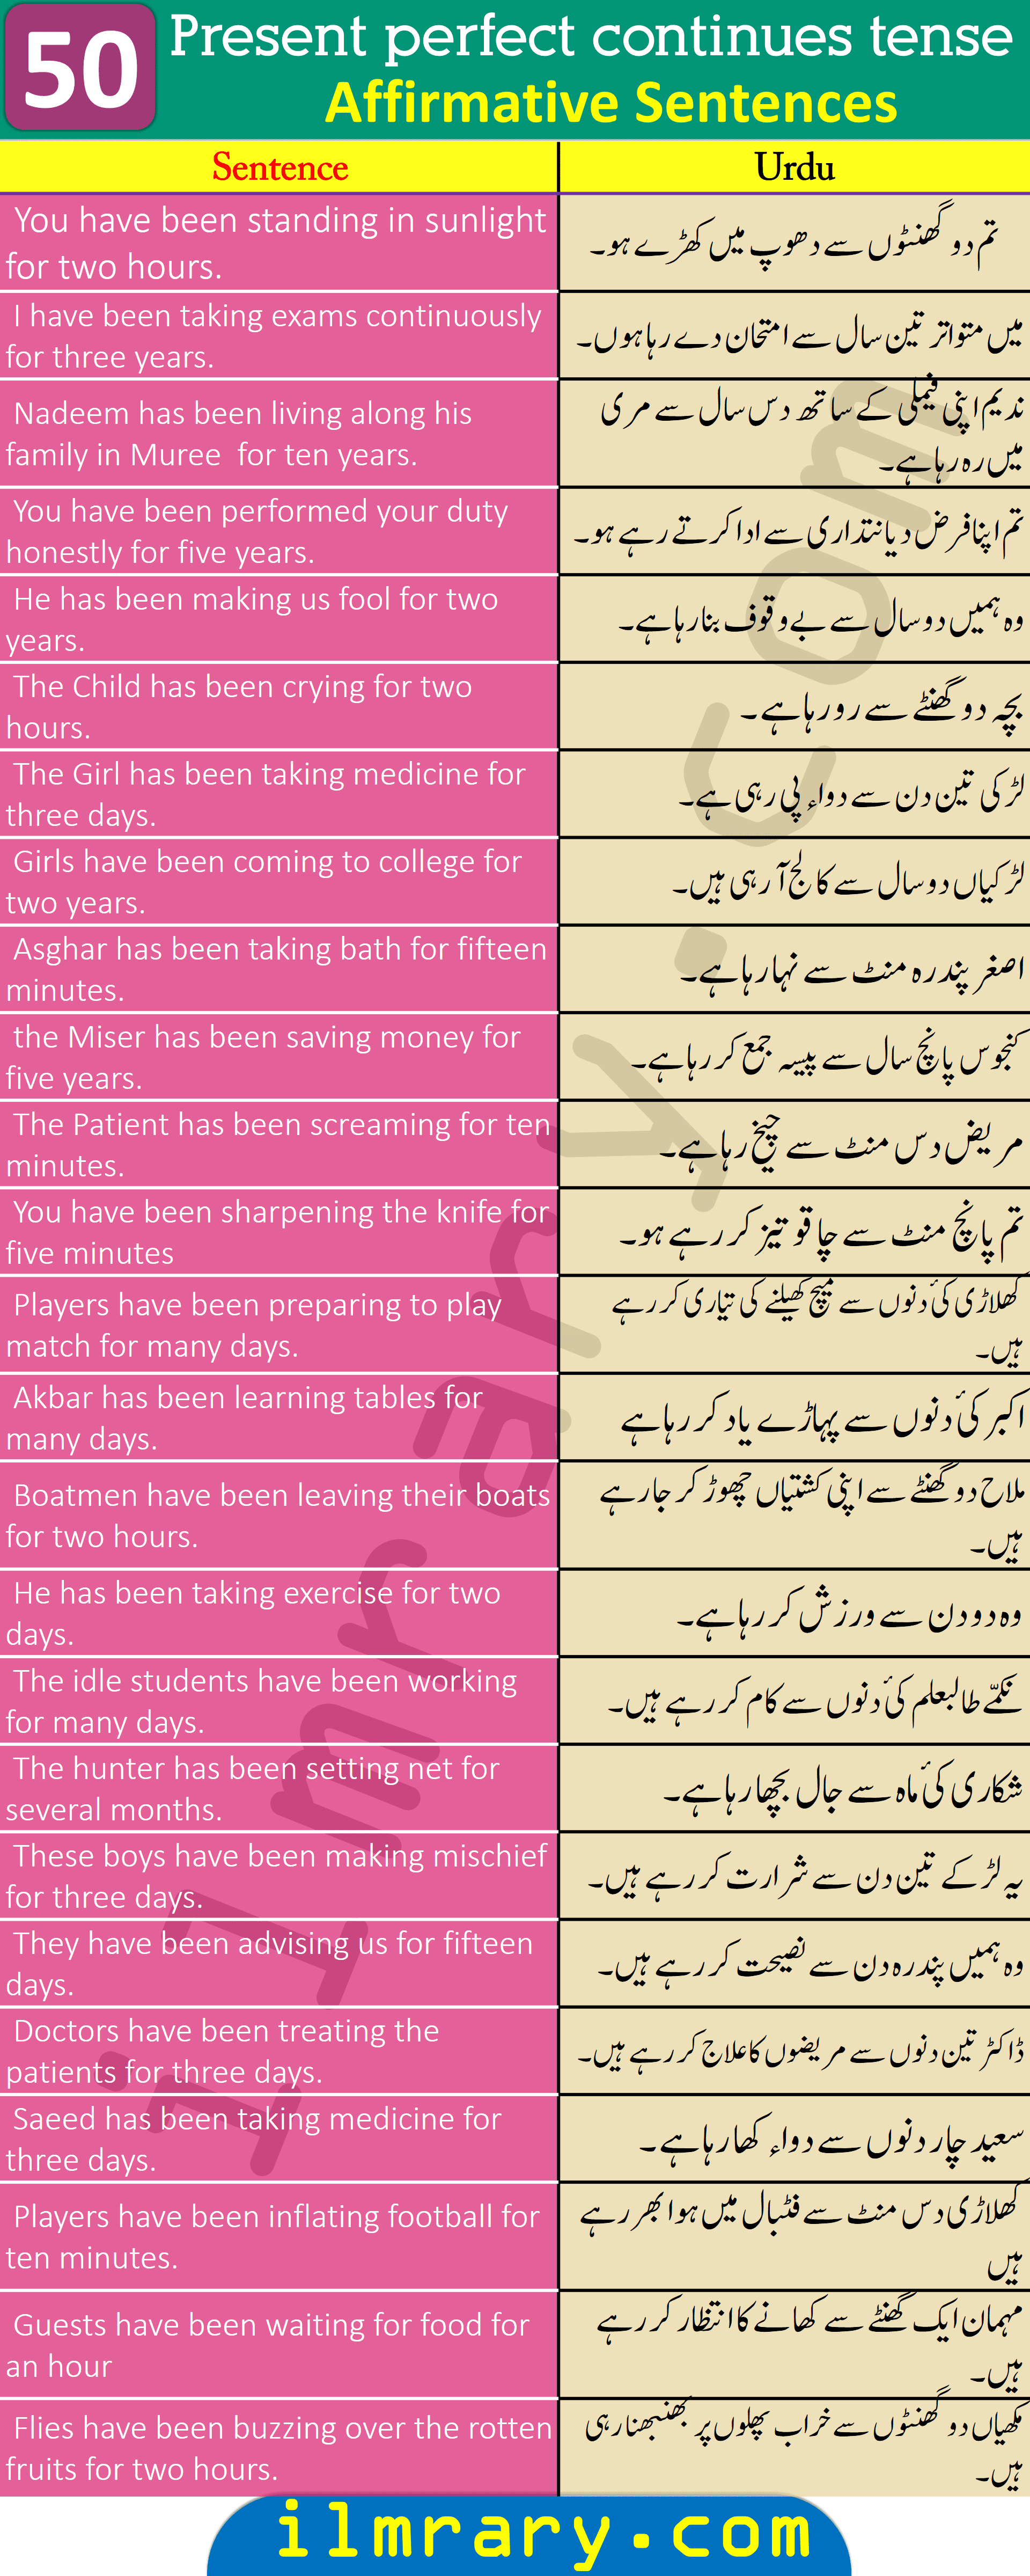 50 Positive Example Sentences for Present Perfect Continuous Tense with Urdu Translation 